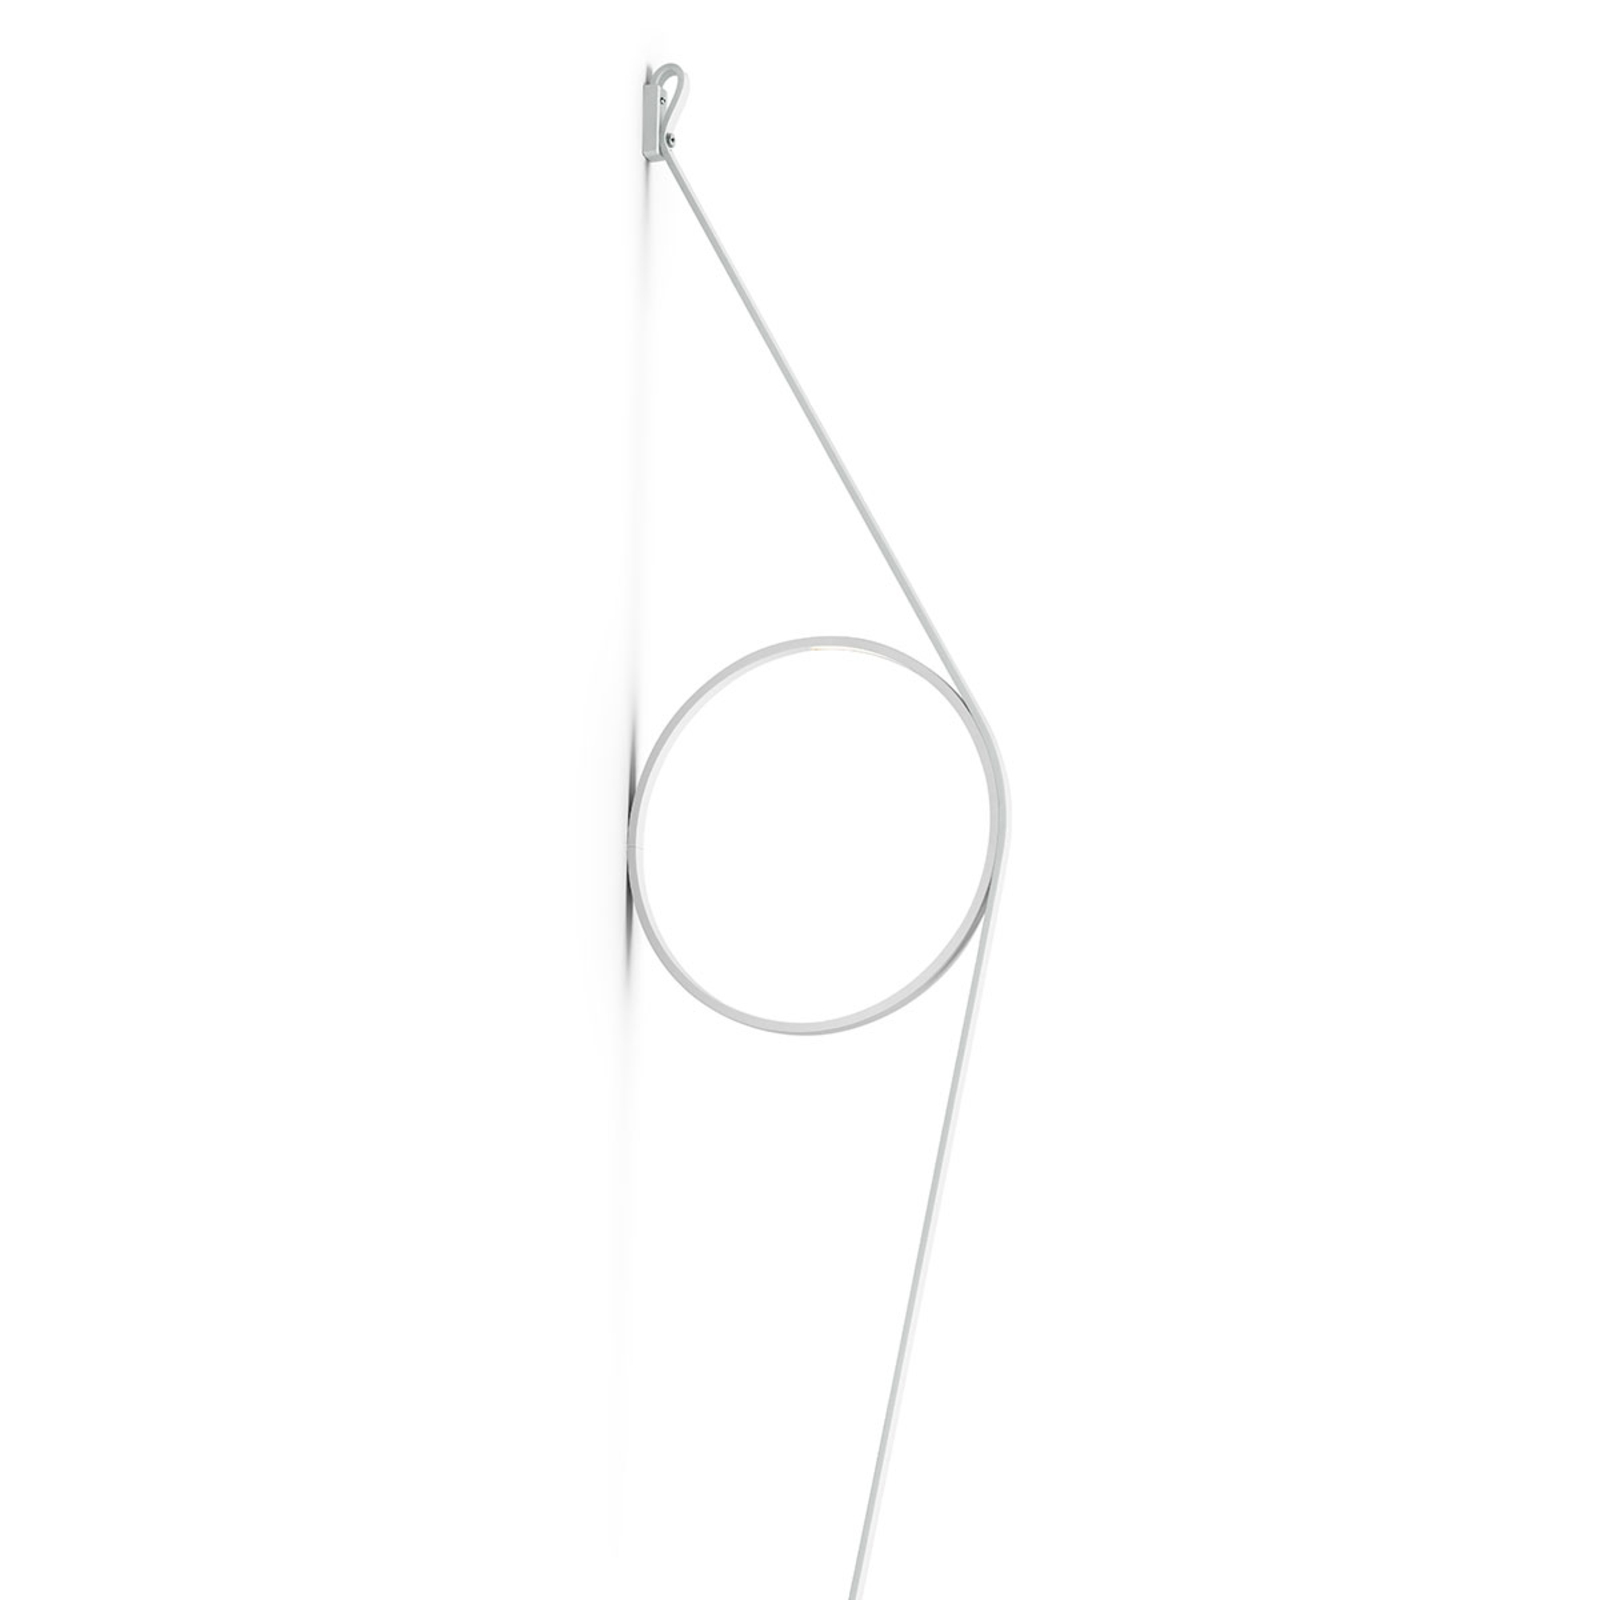 FLOS Wirering Wit LED wandlamp, ring wit